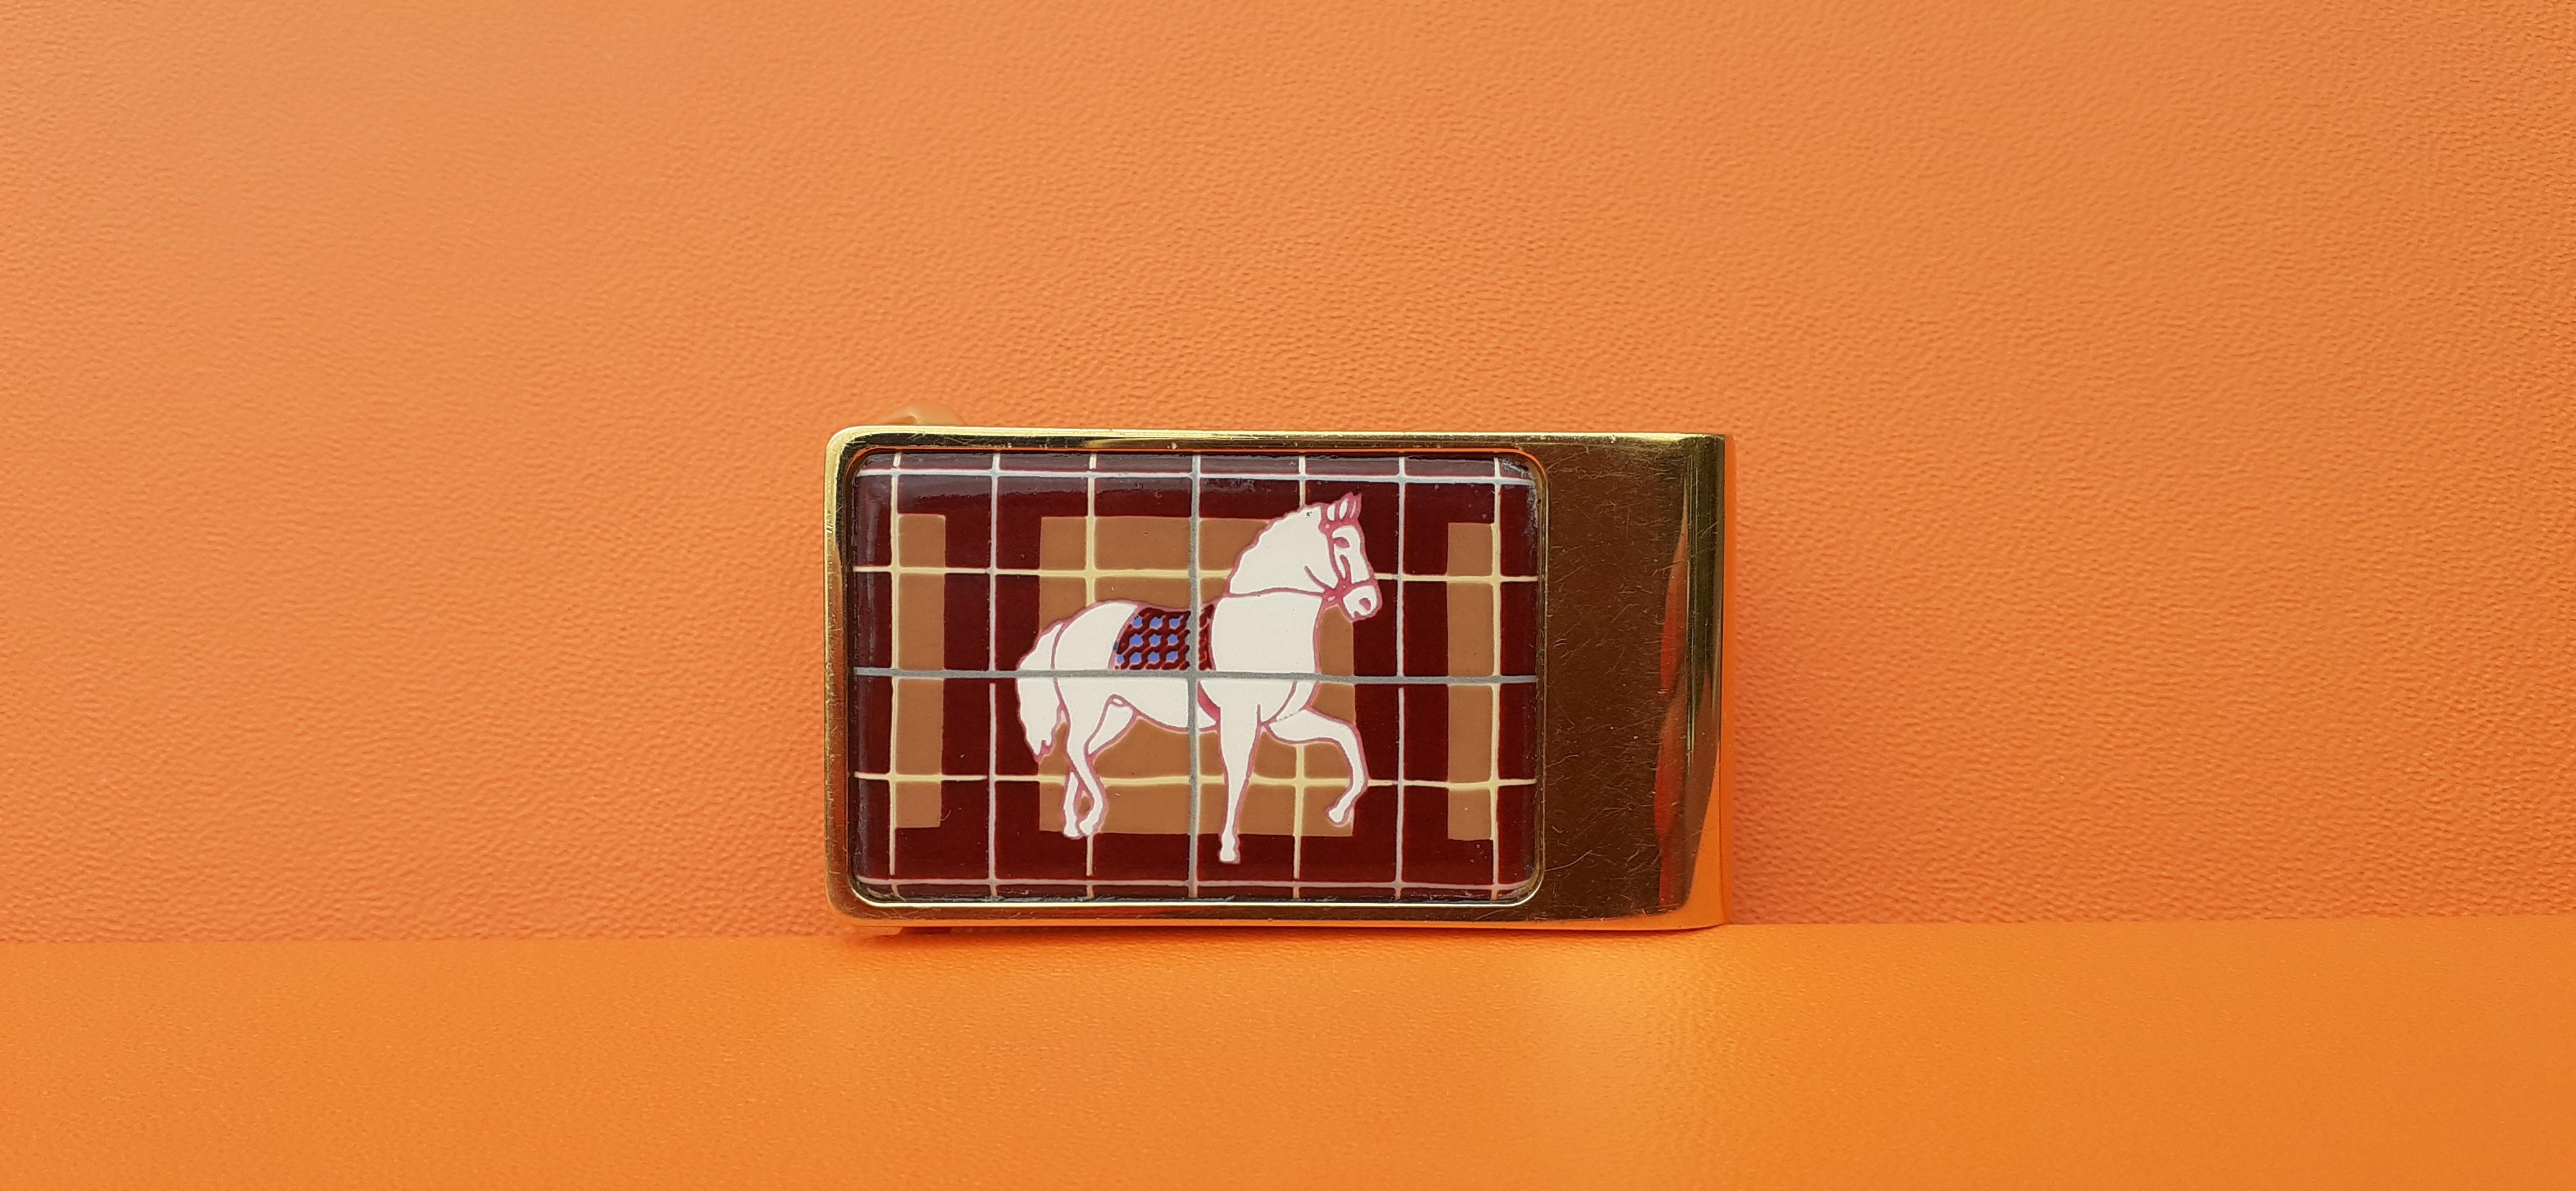 Stunning Authentic Hermès Belt Buckle

Extremely rare removable top plate system

Made of printed enamel and golden hardware

